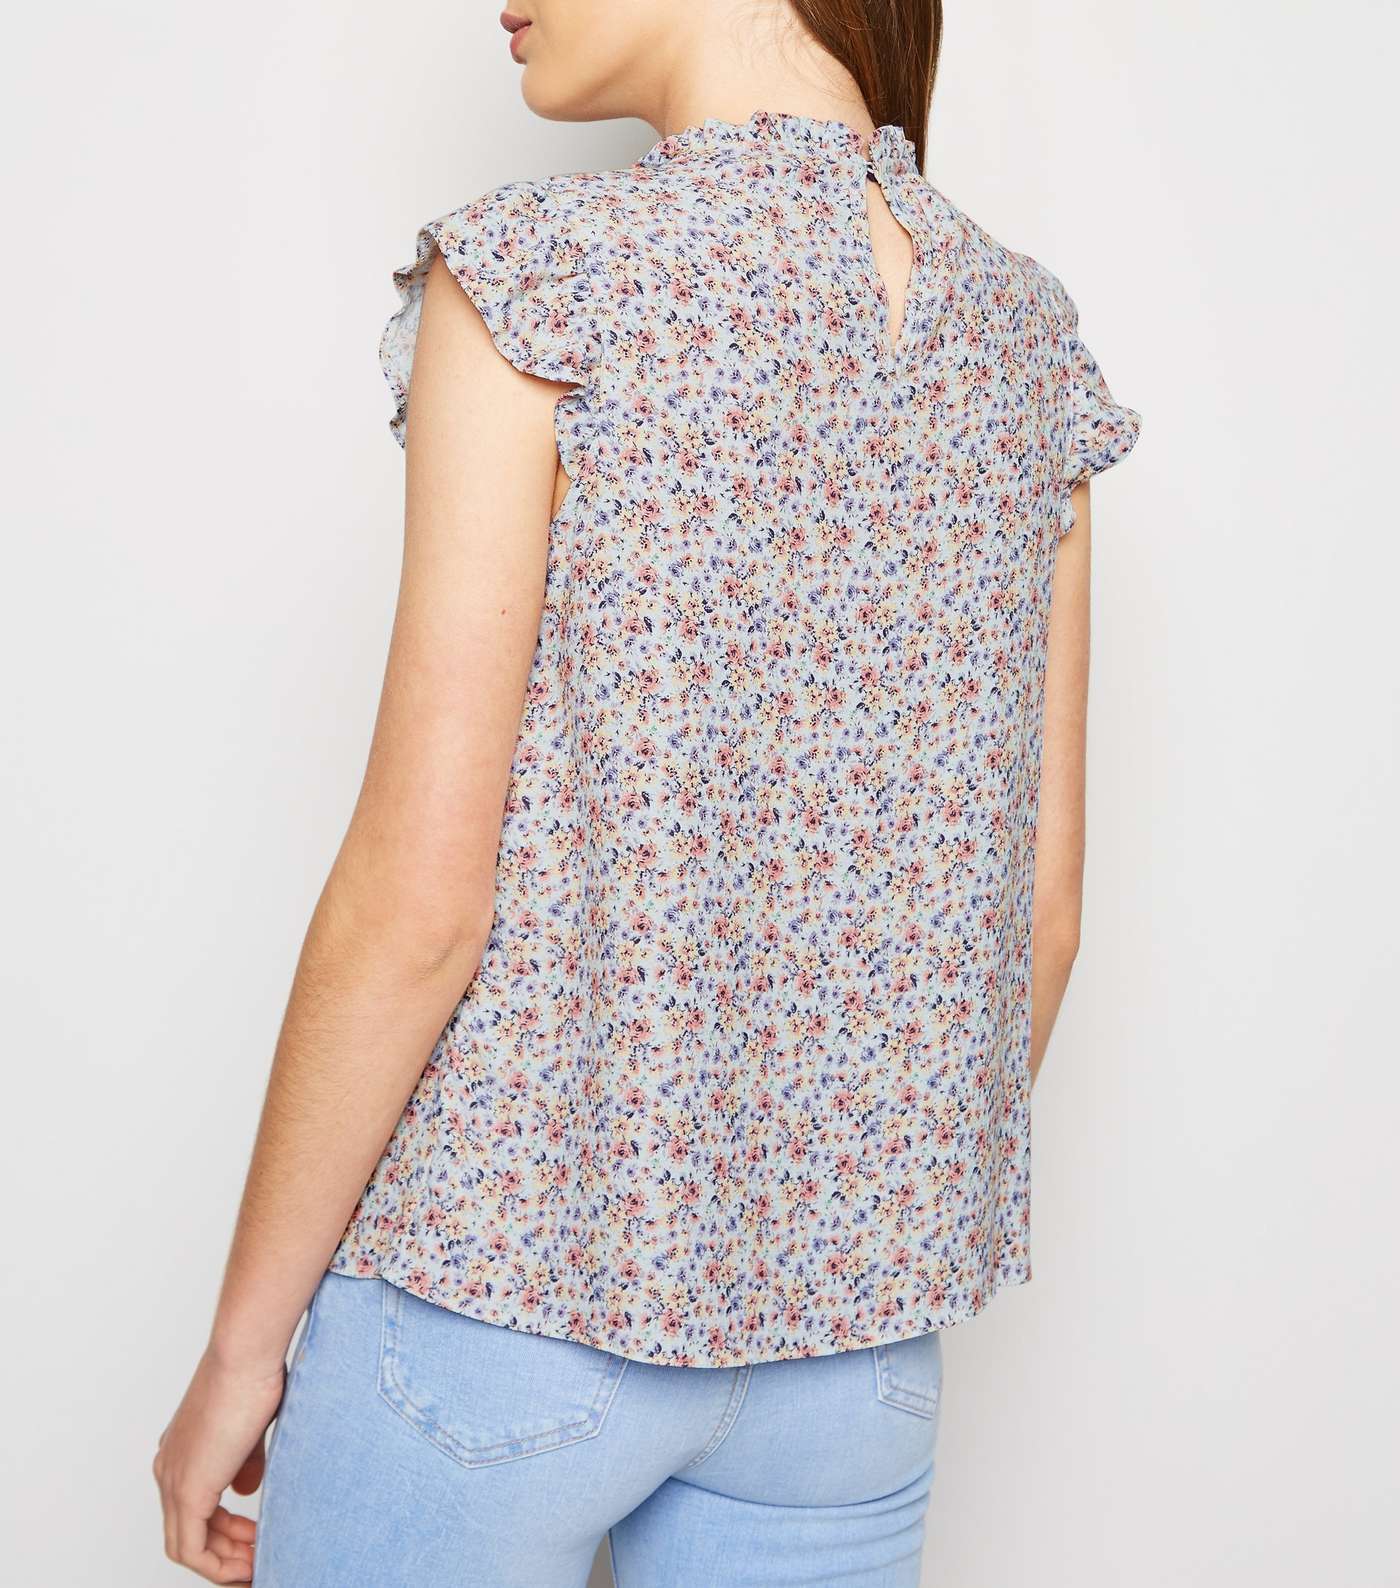 Blue Floral Frill Trim Sleeveless Blouse Image 3